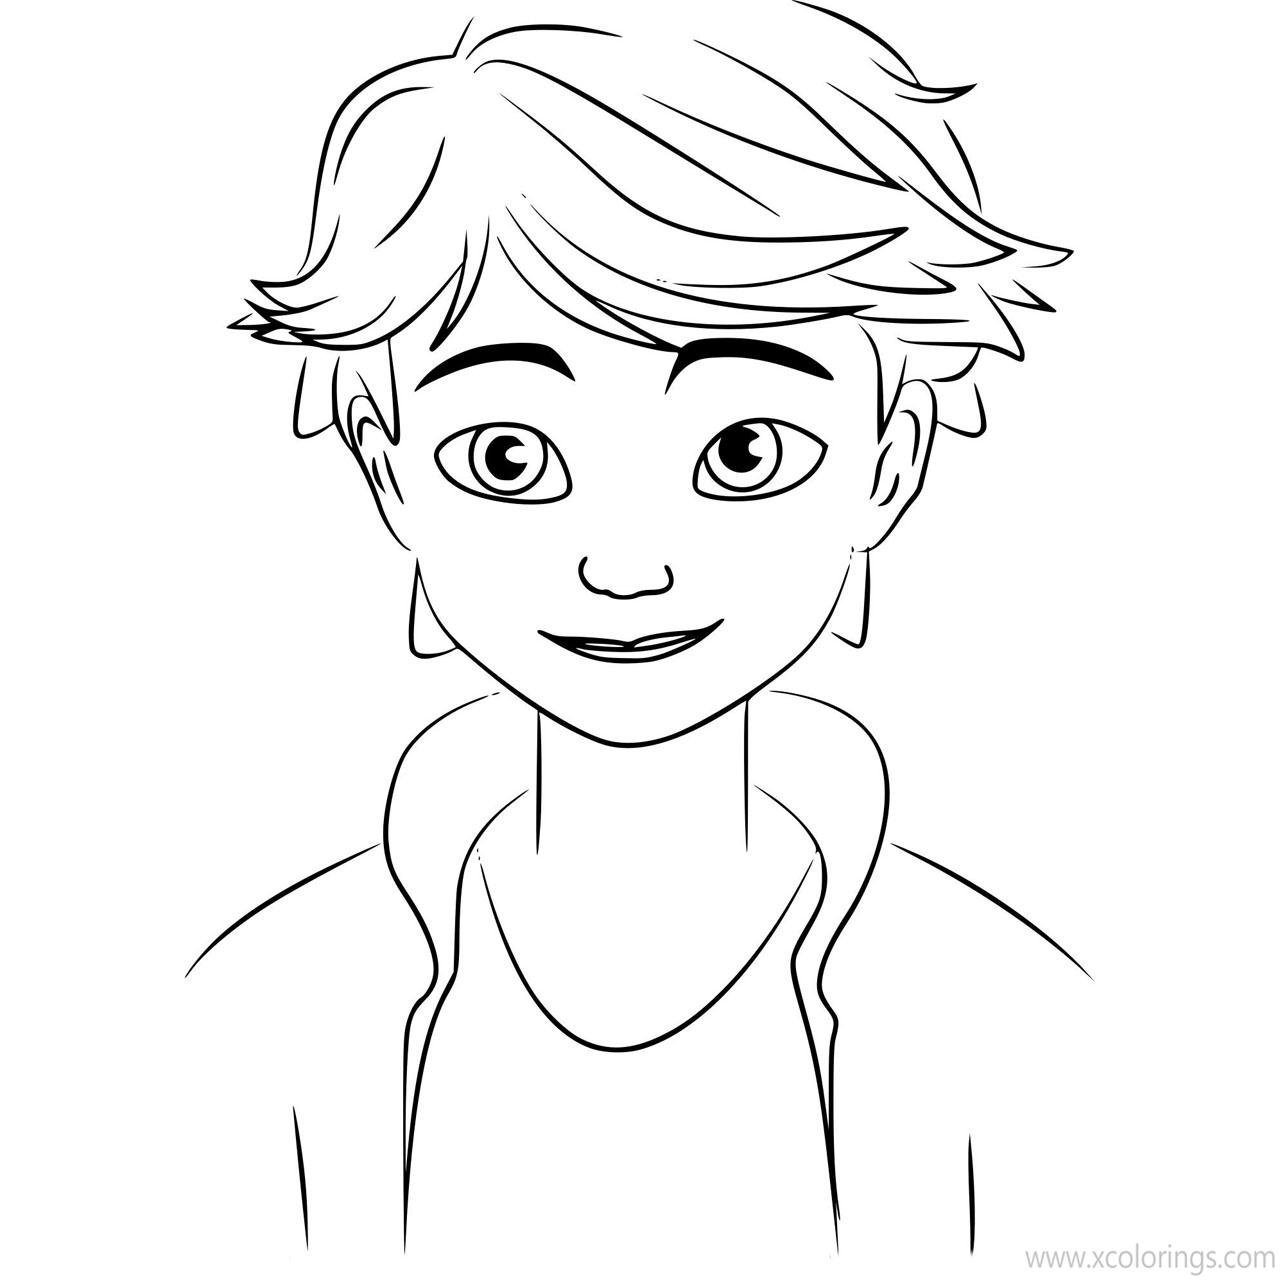 Free Adrien Agreste from Miraculous Ladybug Coloring Pages printable